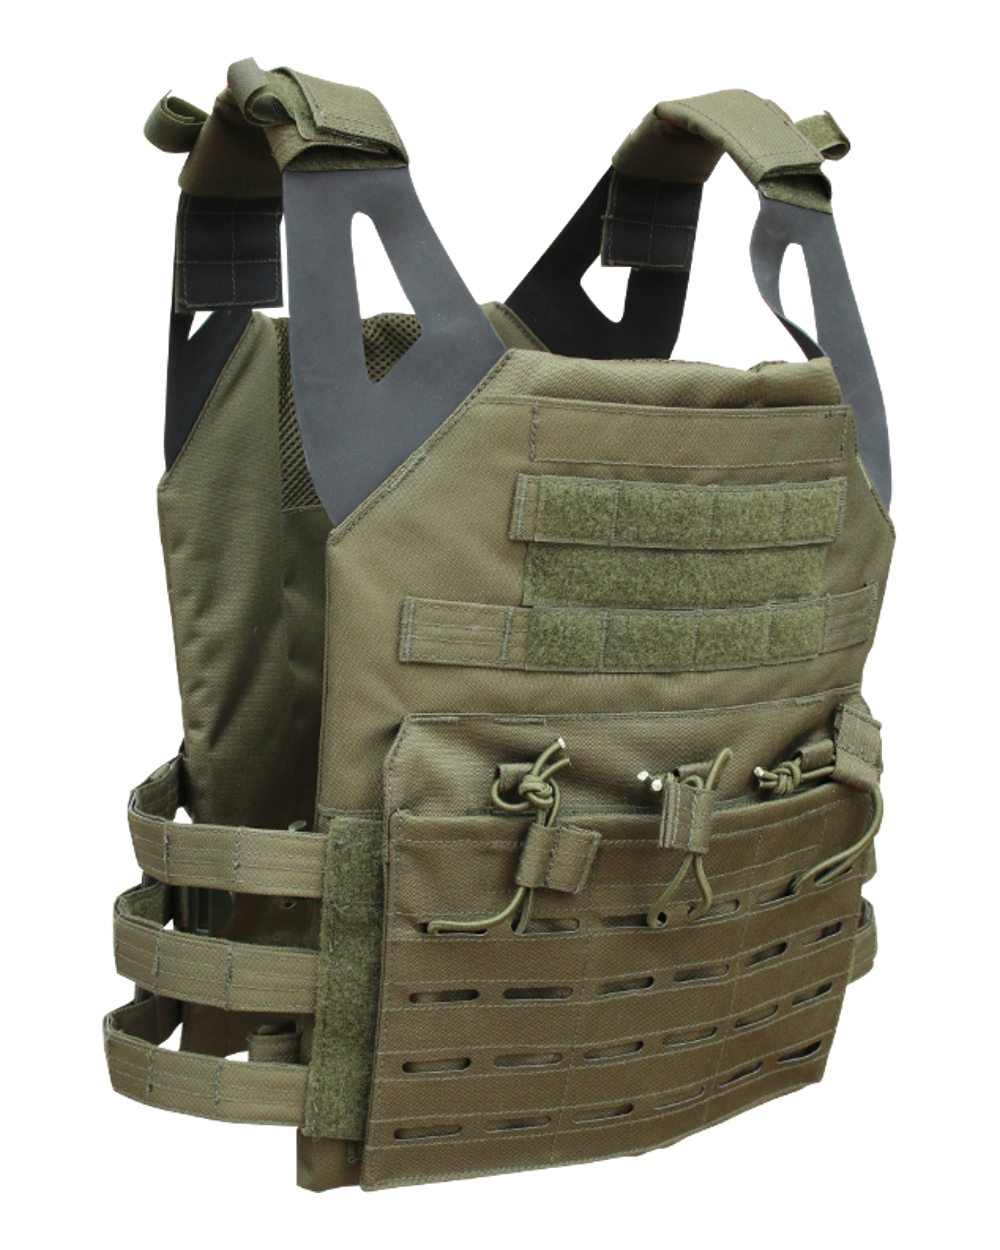 Viper Special Ops Plate Carrier in Green 